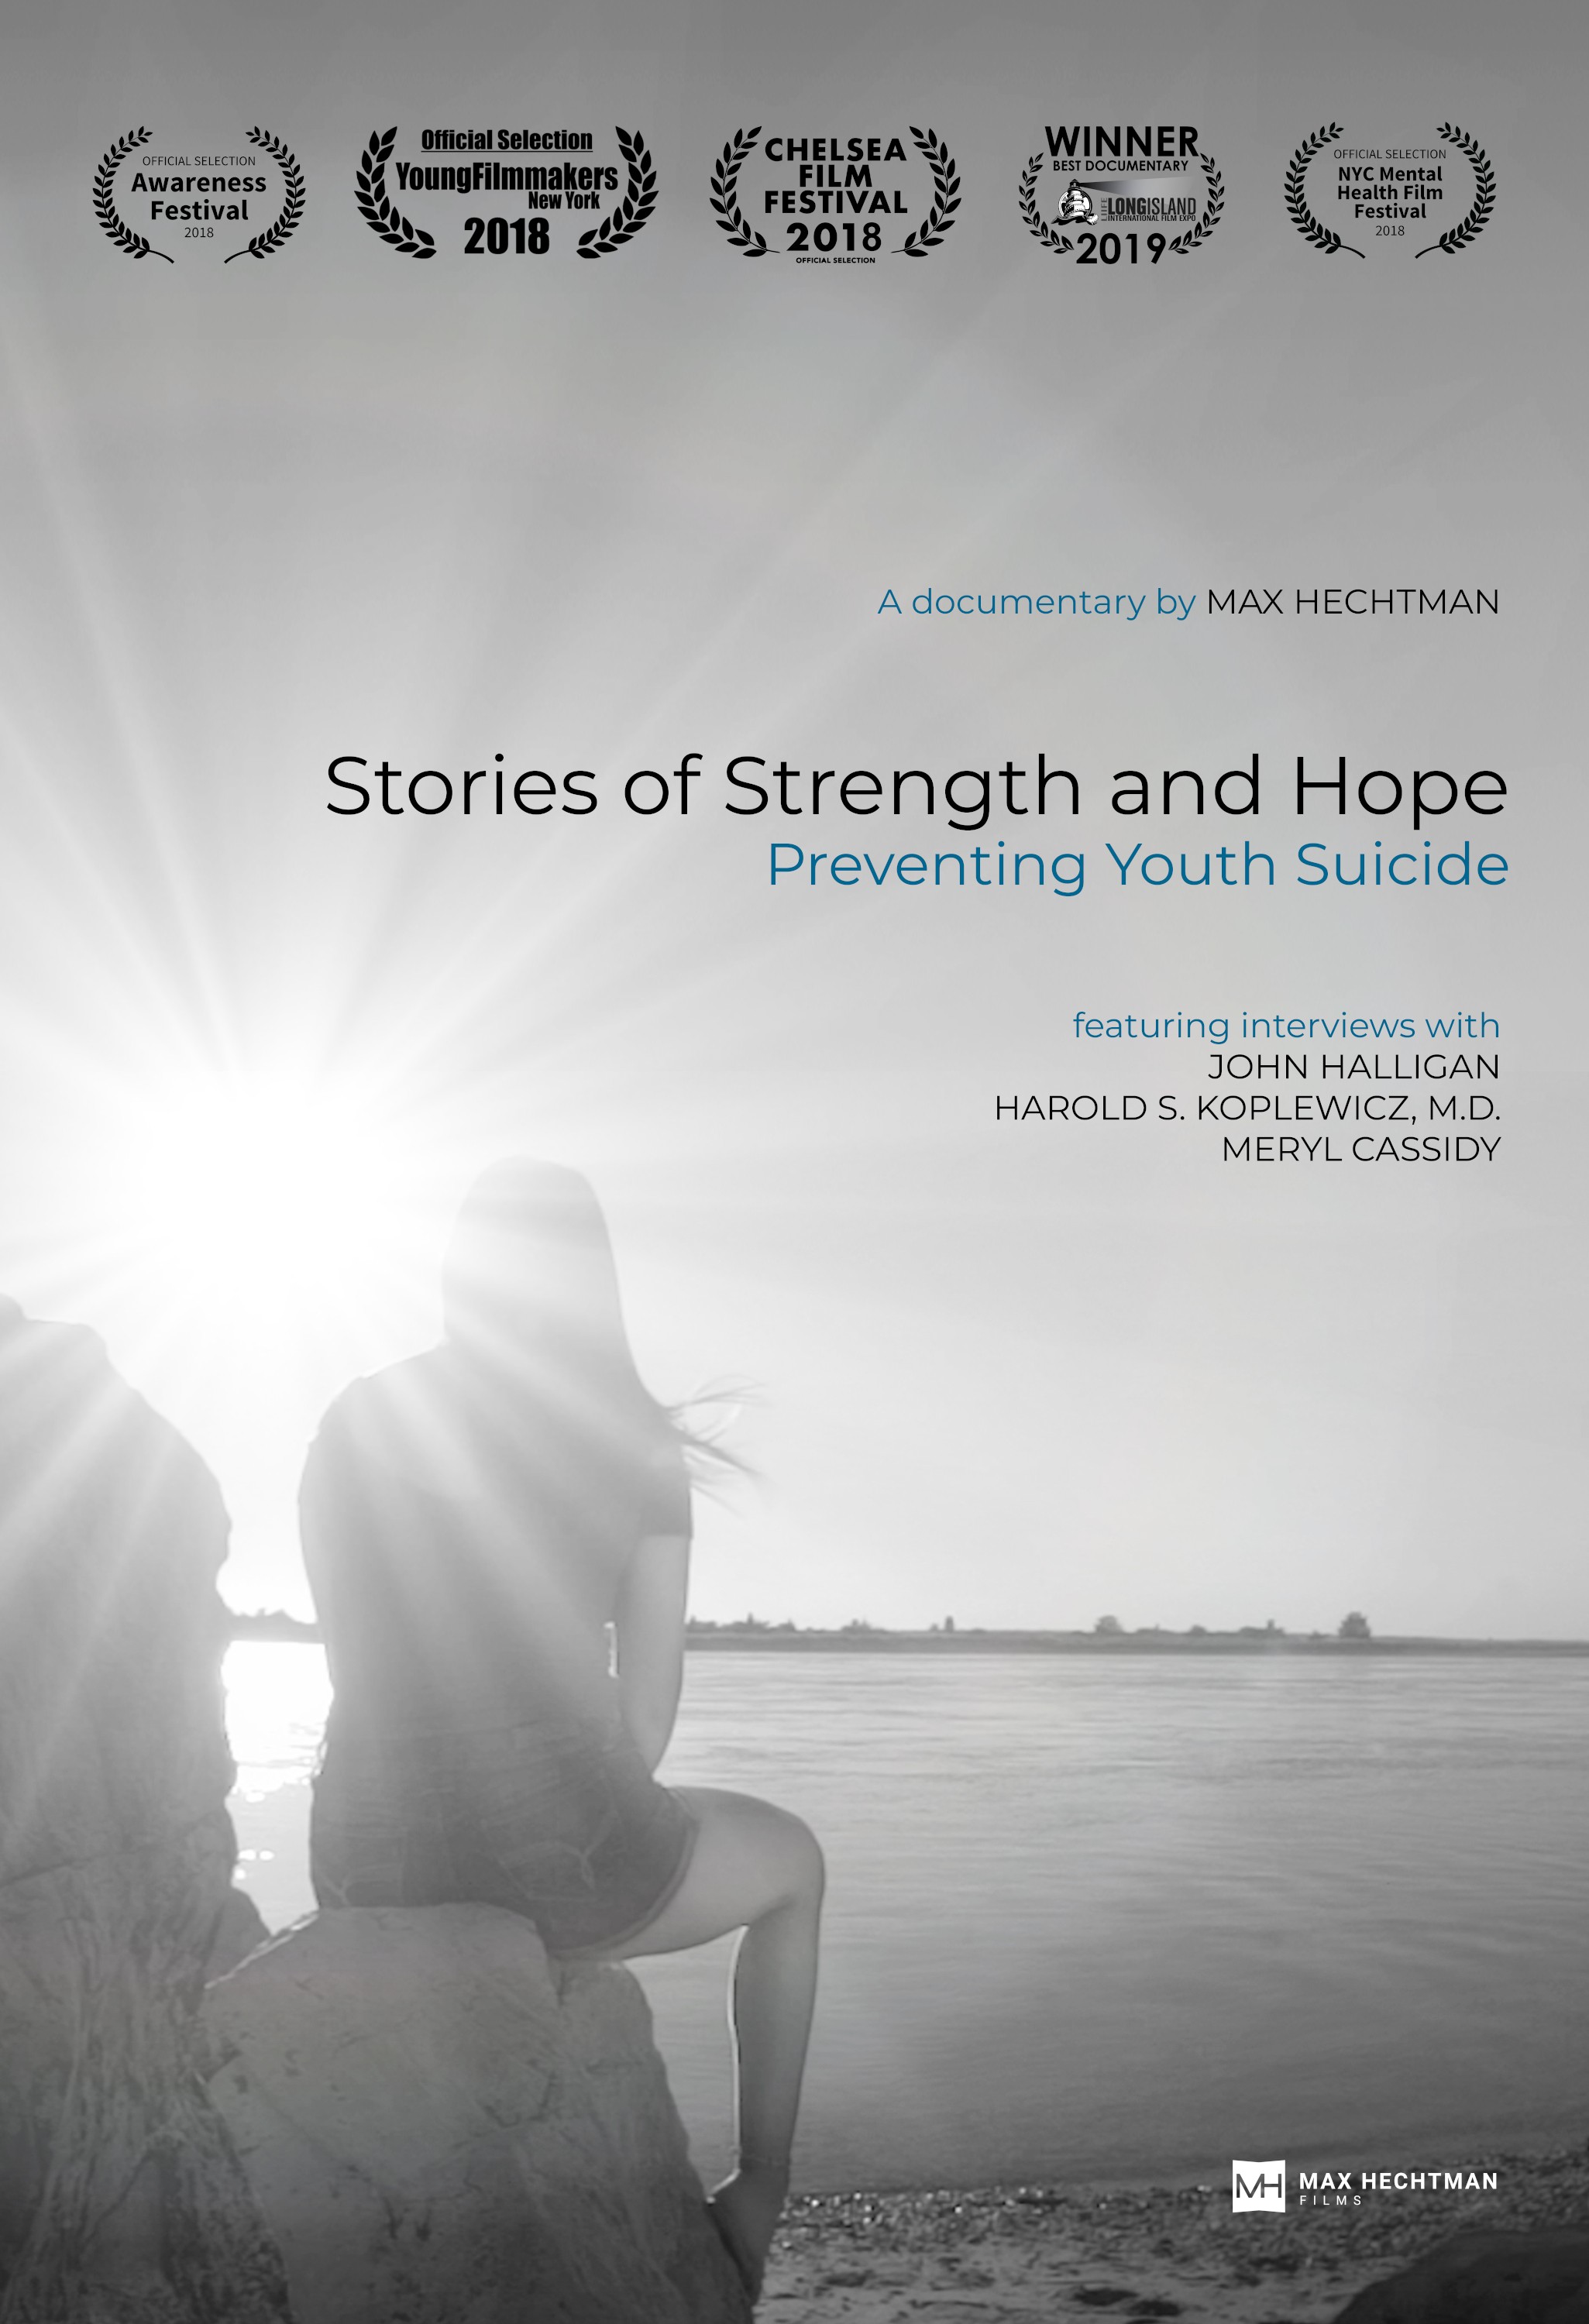 Mega Sized Movie Poster Image for Stories of Strength and Hope: Preventing Youth Suicide